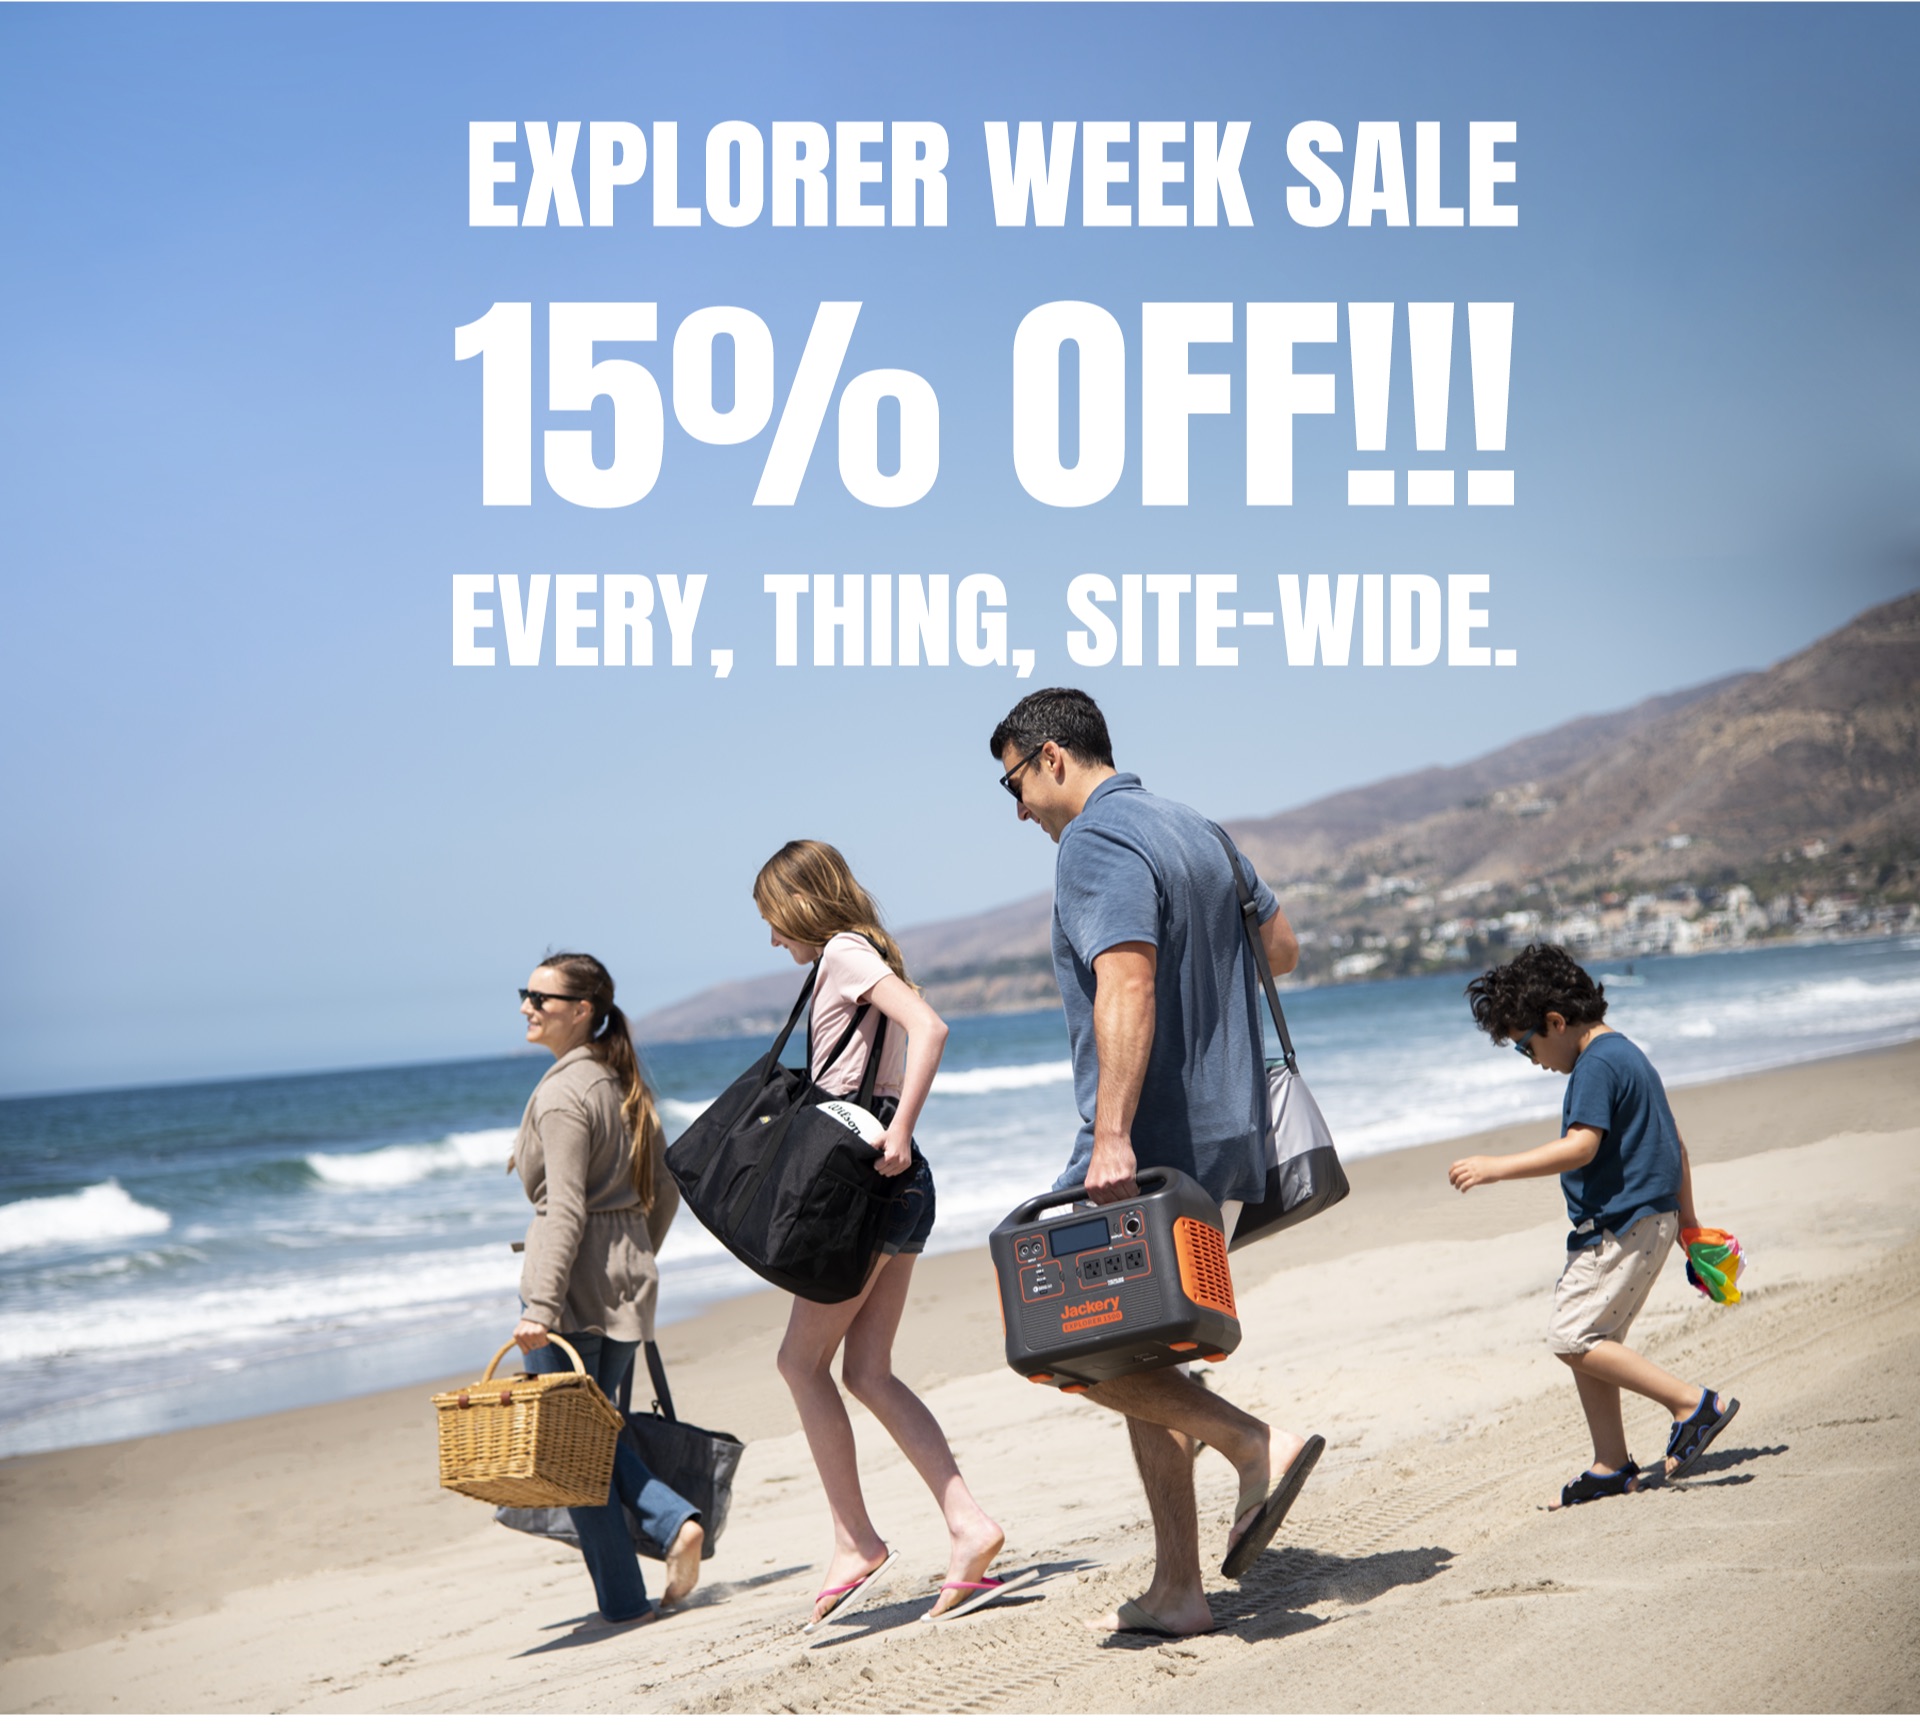 Jackery Explorer Week 15% Off Everything! Amazon.com and Jackery.com Includes Portable Power Station Explorers, Solar Panels & Accessories. Generator, Outdoor, Emergency, Camping